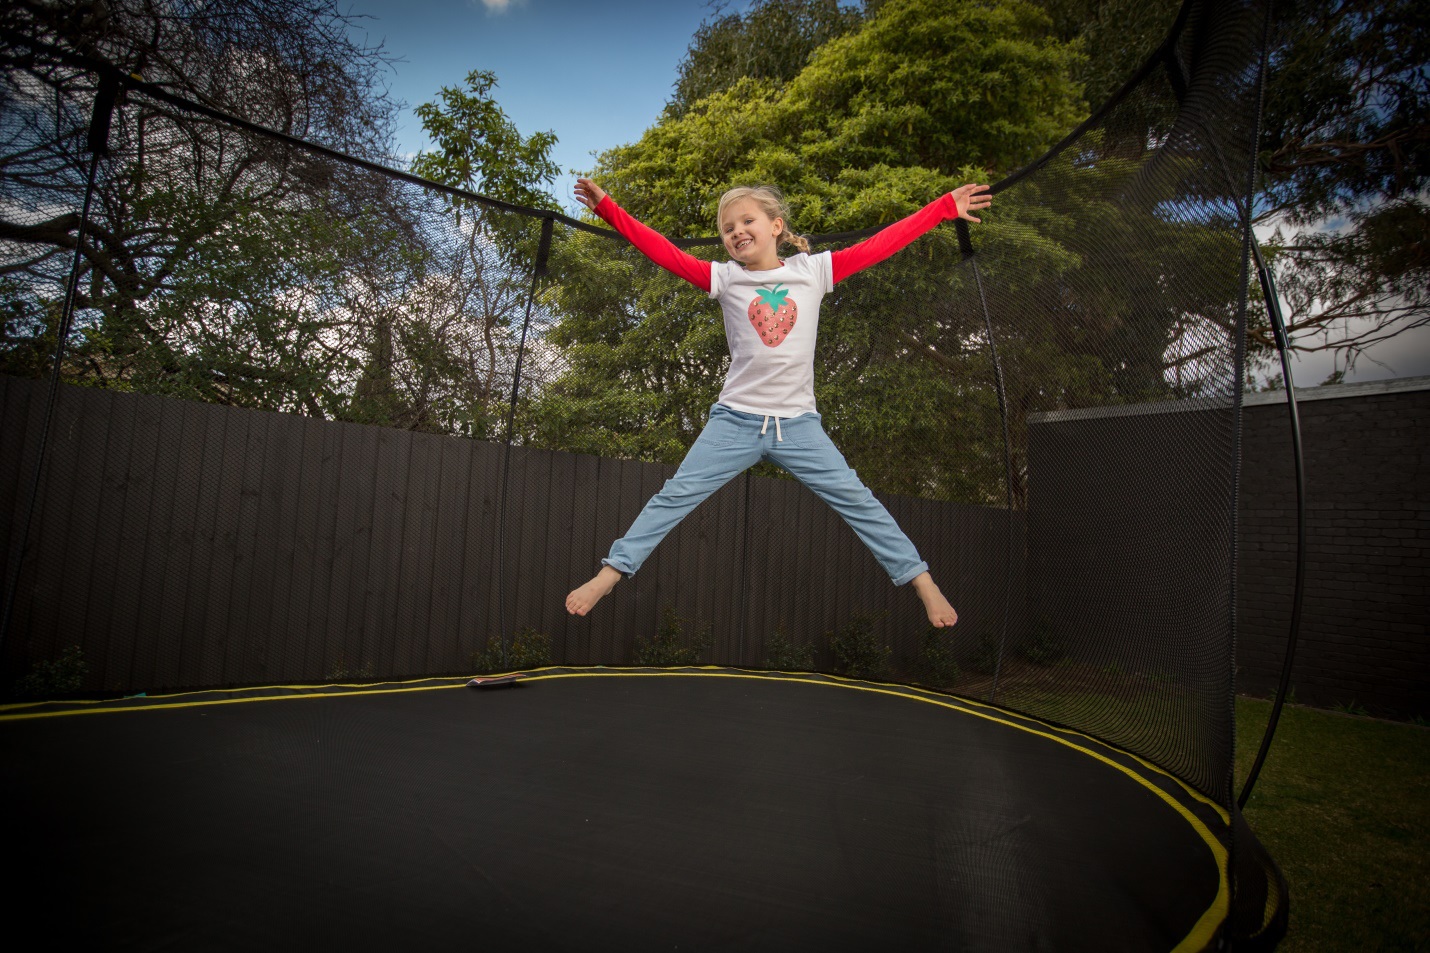 The World's Safest Trampoline makes a great gift...!